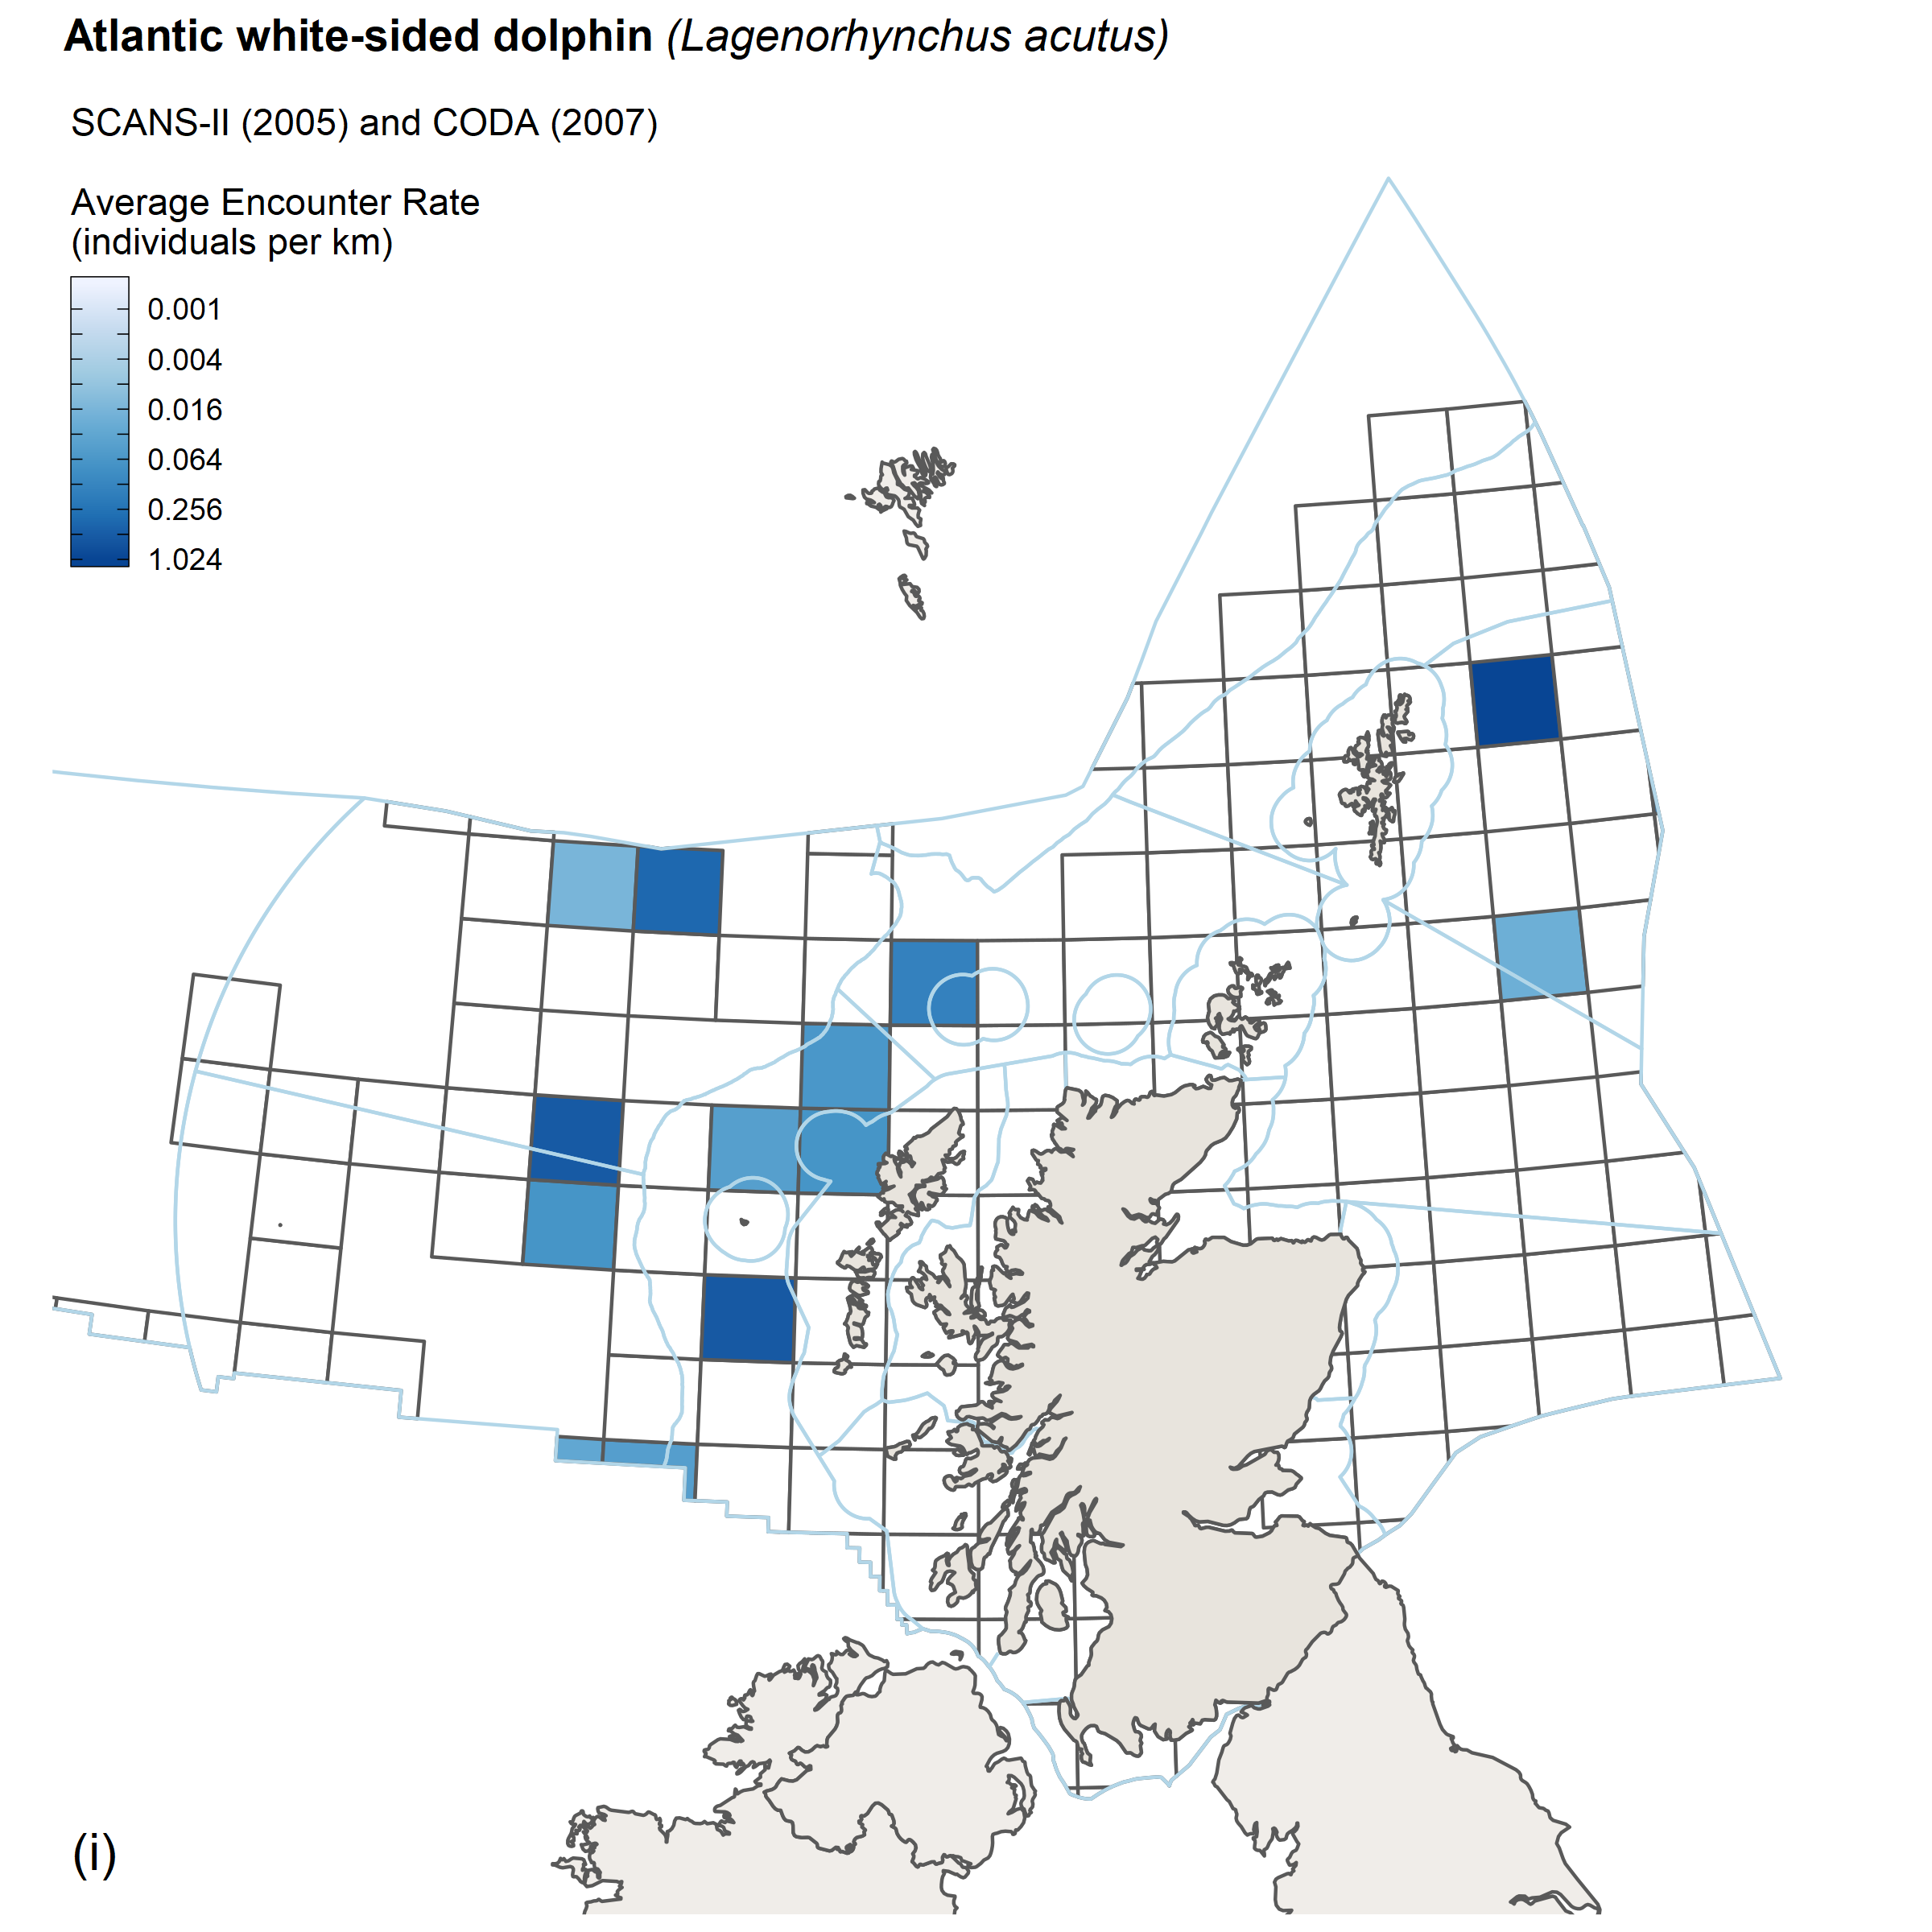 Encounter rates for Atlantic white sided dolphin from SCANS II/CODA survey